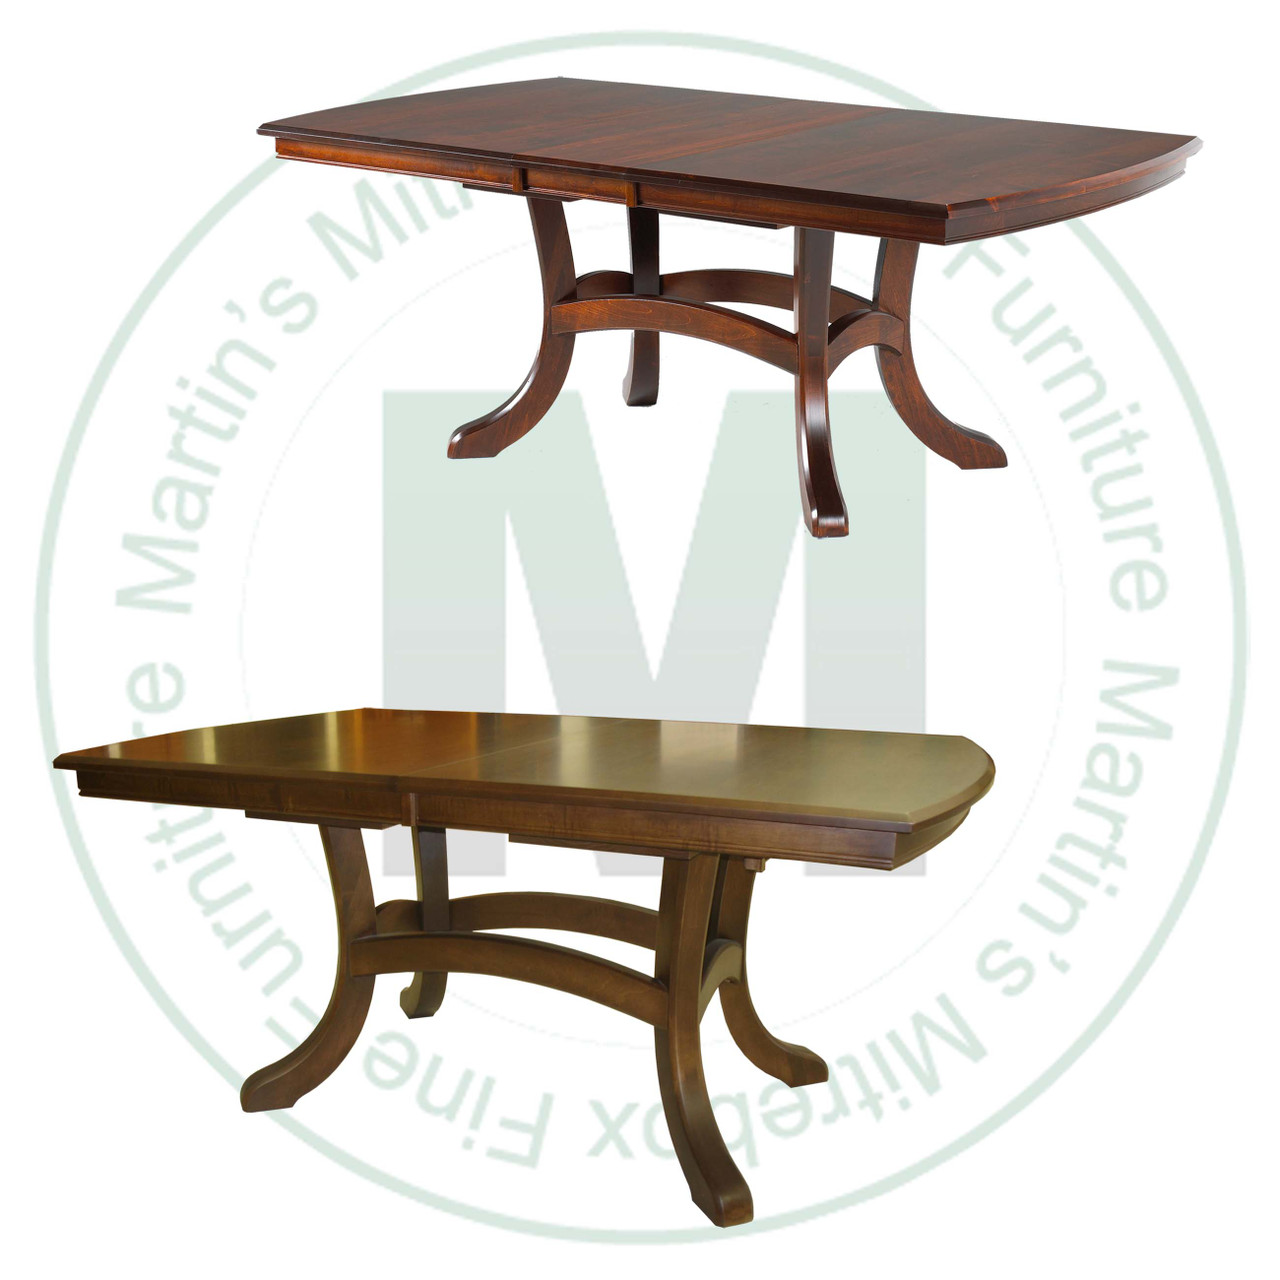 Oak Jordan Double Pedestal Table 48''D x 72''W x 30''H With 2 - 12'' Leaves. Table Has 1.25'' Thick Top